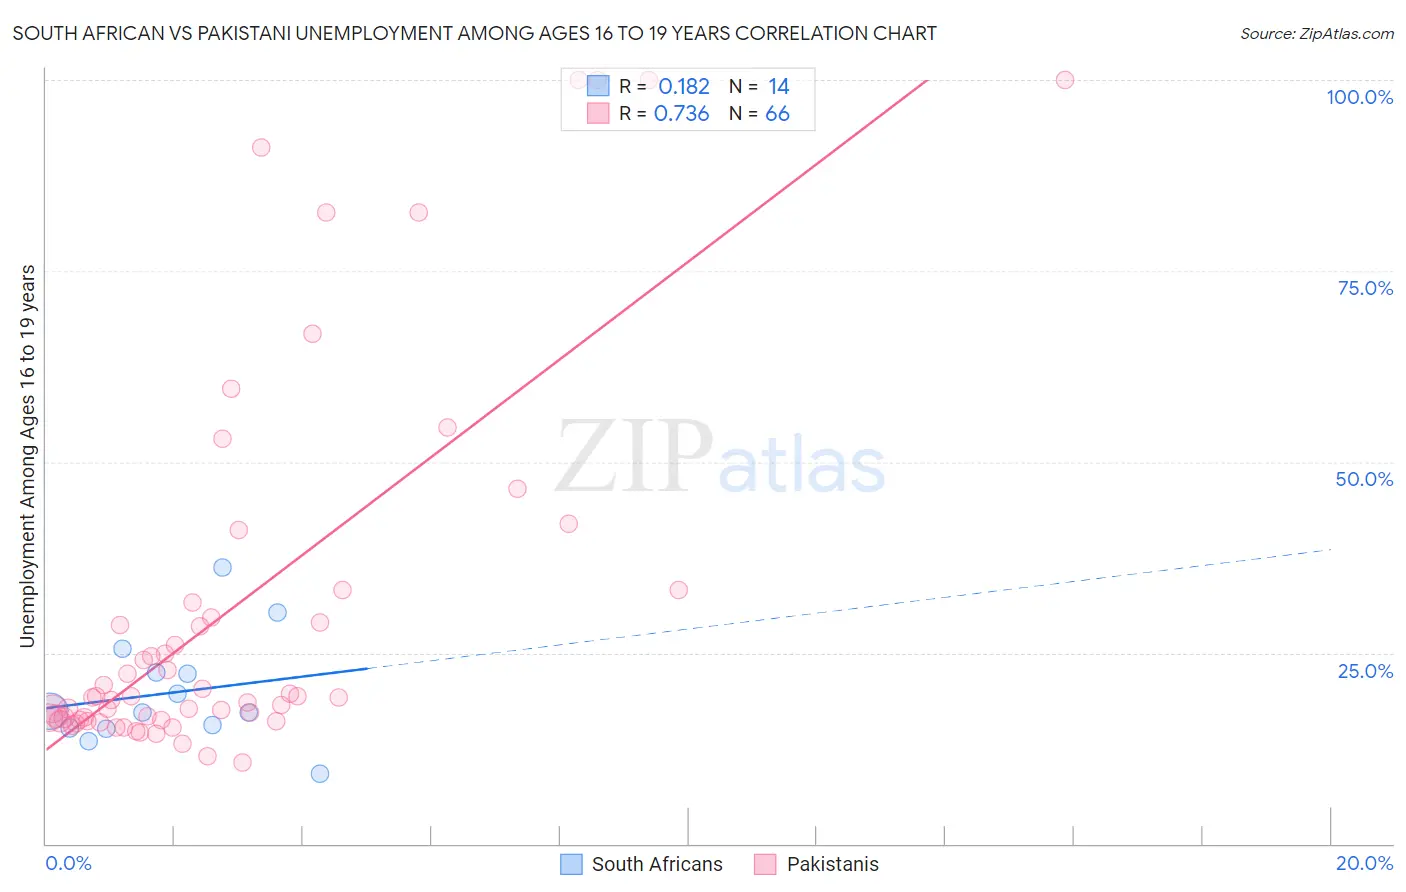 South African vs Pakistani Unemployment Among Ages 16 to 19 years